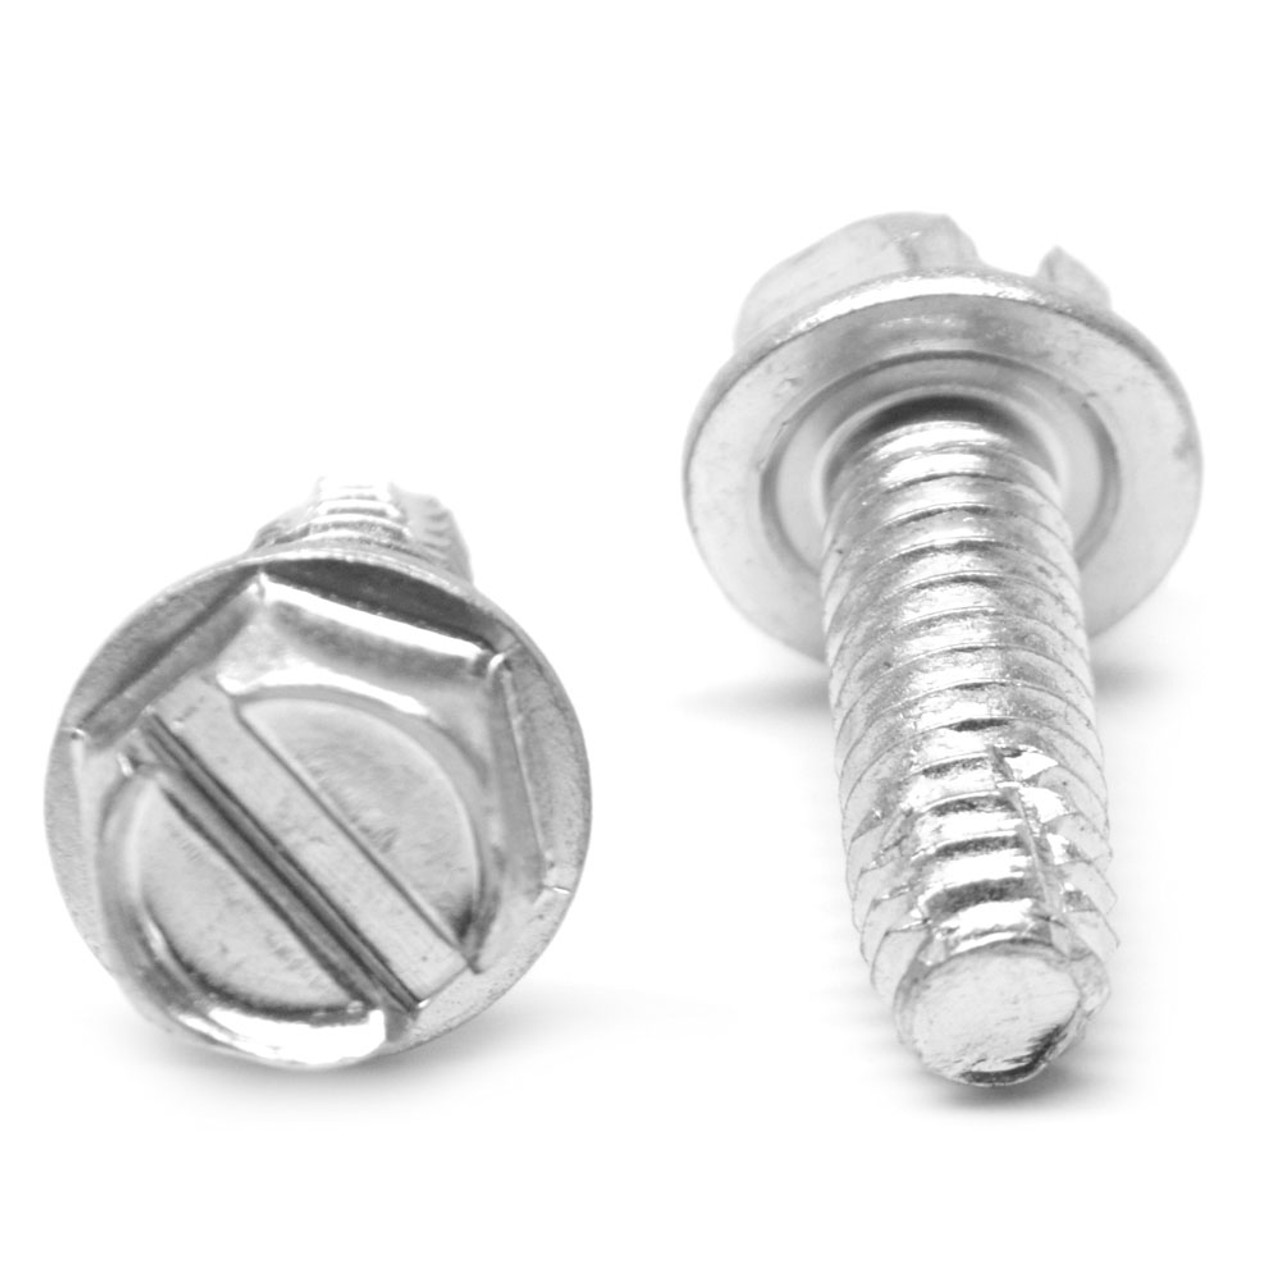 1/4-20 x 1/2 Coarse Thread Thread Cutting Screw Slotted Hex Washer Head Type F Stainless Steel 18-8